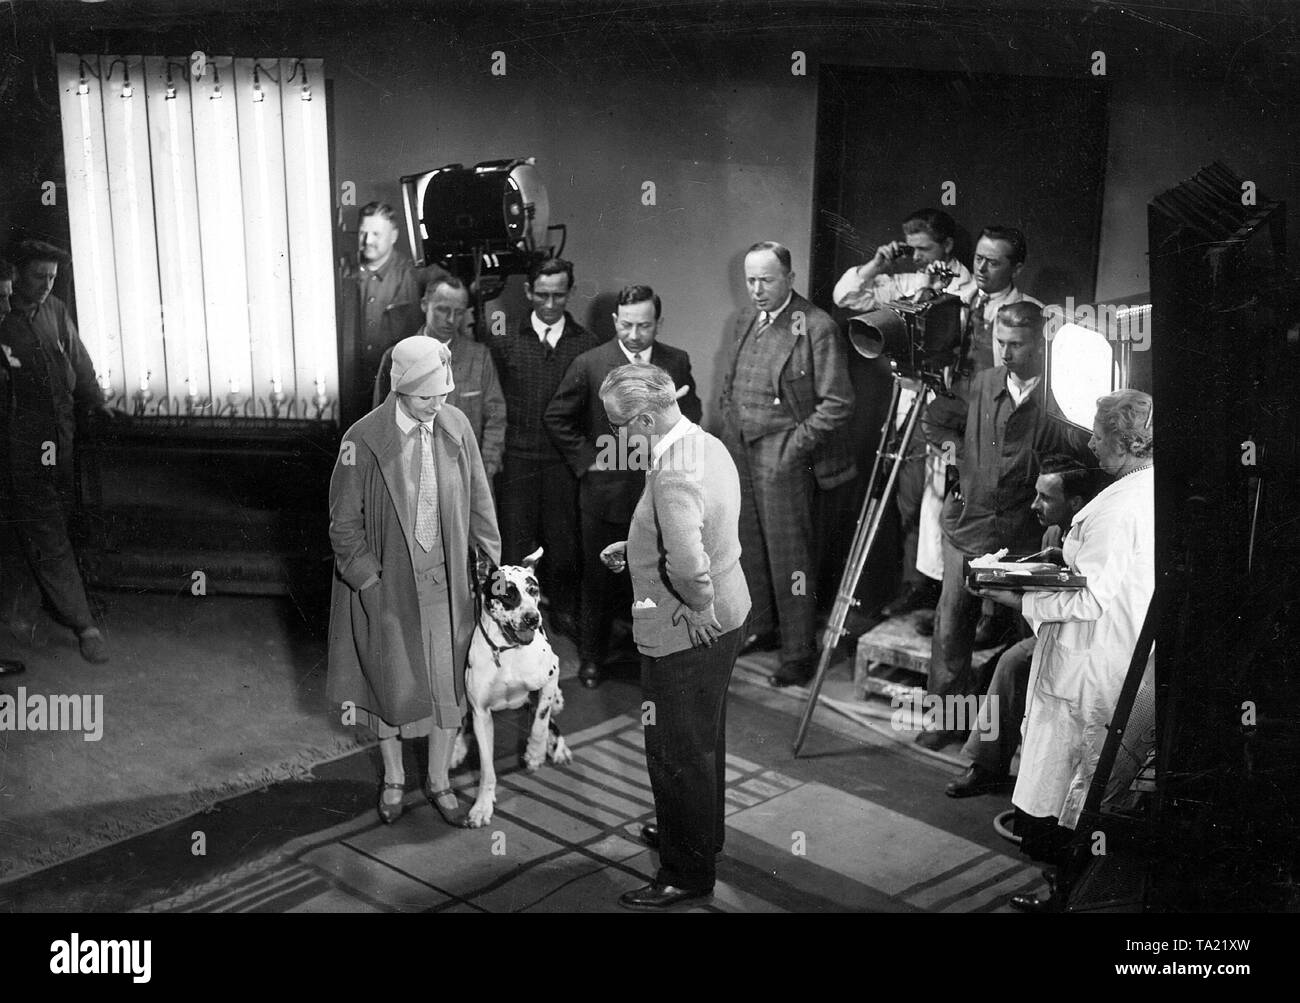 The actress Henny Porten with a dog at the filming of a silent movie in the film studio. Stock Photo